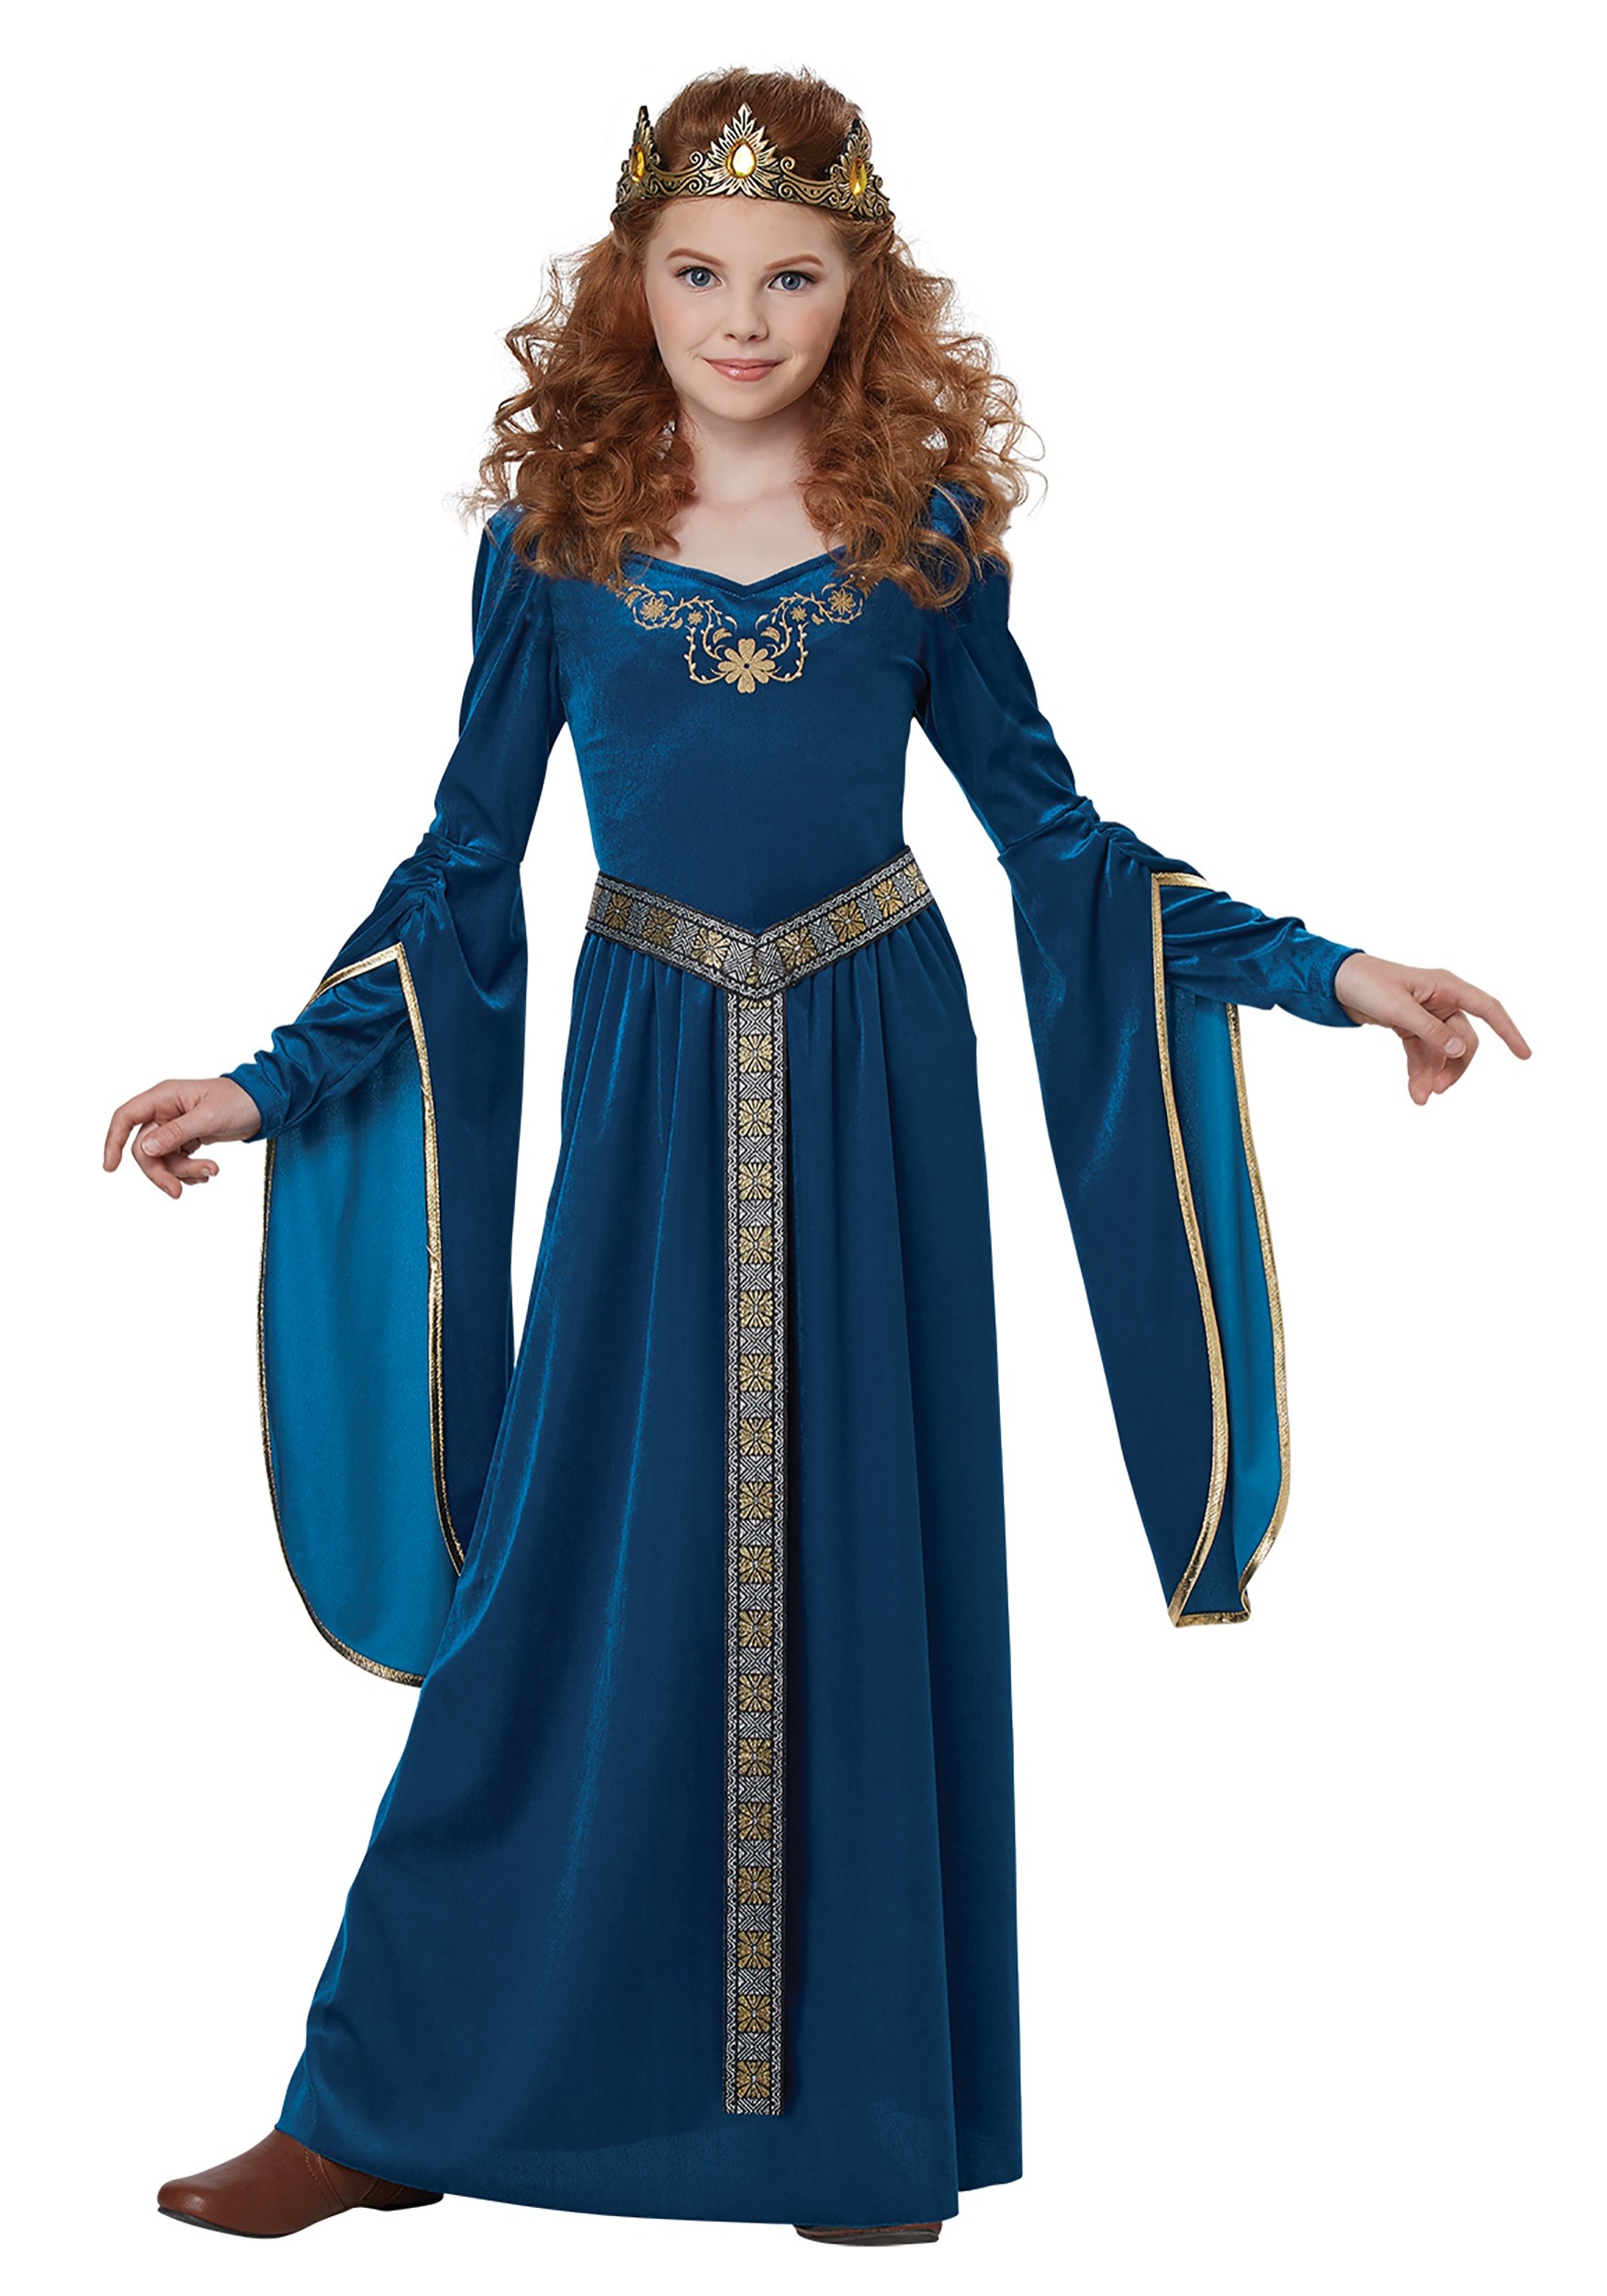 https://images.halloweencostumes.ca/products/42223/1-1/medieval-princess-girls-costume.jpg